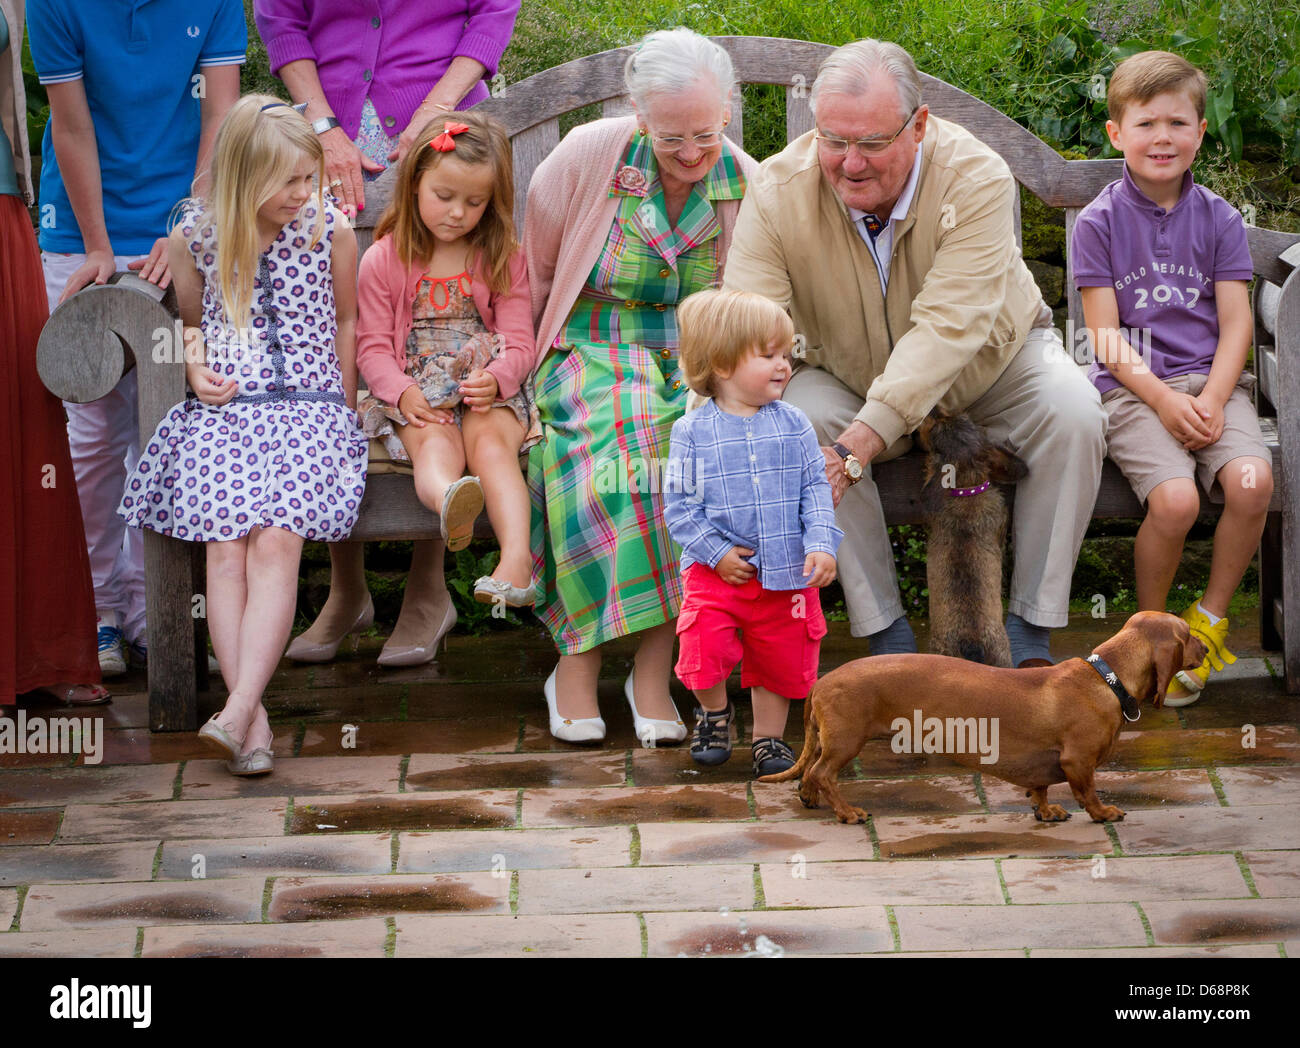 (L-R) Countess Ingrid, Princess Isabella, Queen Margrethe, Prince Henrik with Prince Vincent, and Prince Christian pose for the media at the annual photo session at Grasten Palace in Grasten, Denmark, 20 July 2012. Princess Jospehine stayed in the palace because she is sick. Photo: Patrick van Katwijk NETHERLANDS OUT Stock Photo